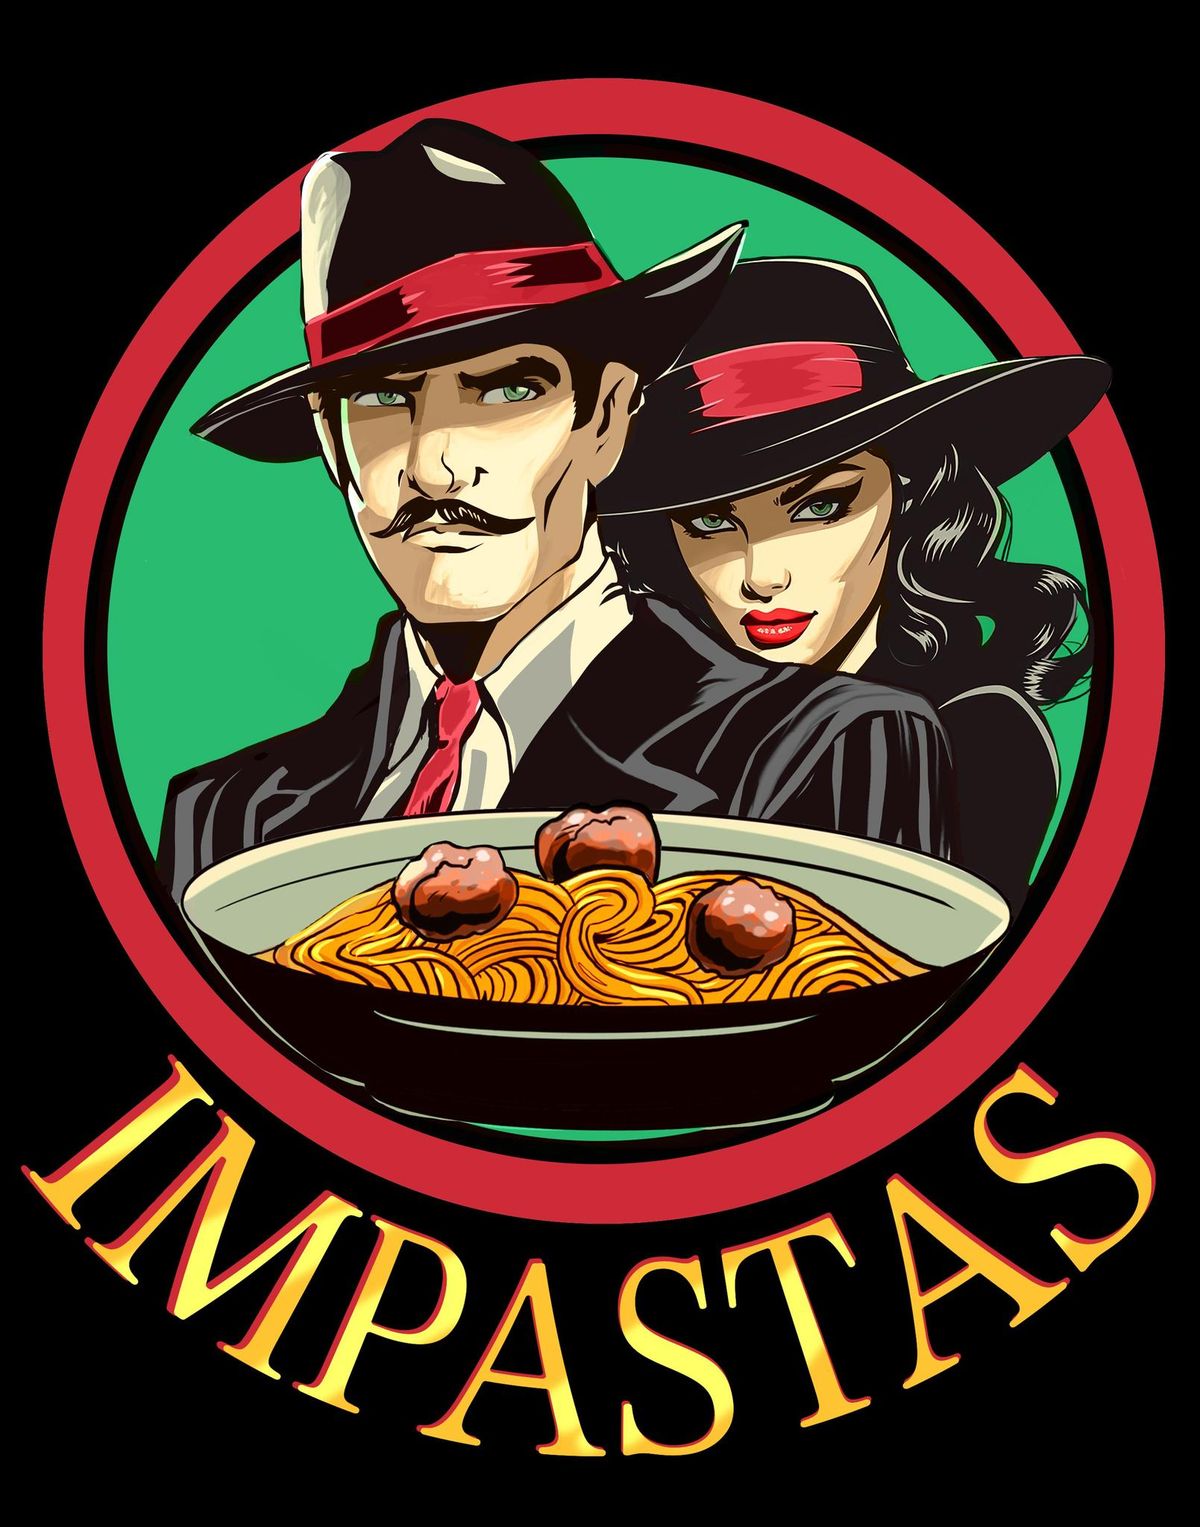 Impastas at Endeavor Brewing and Spirits